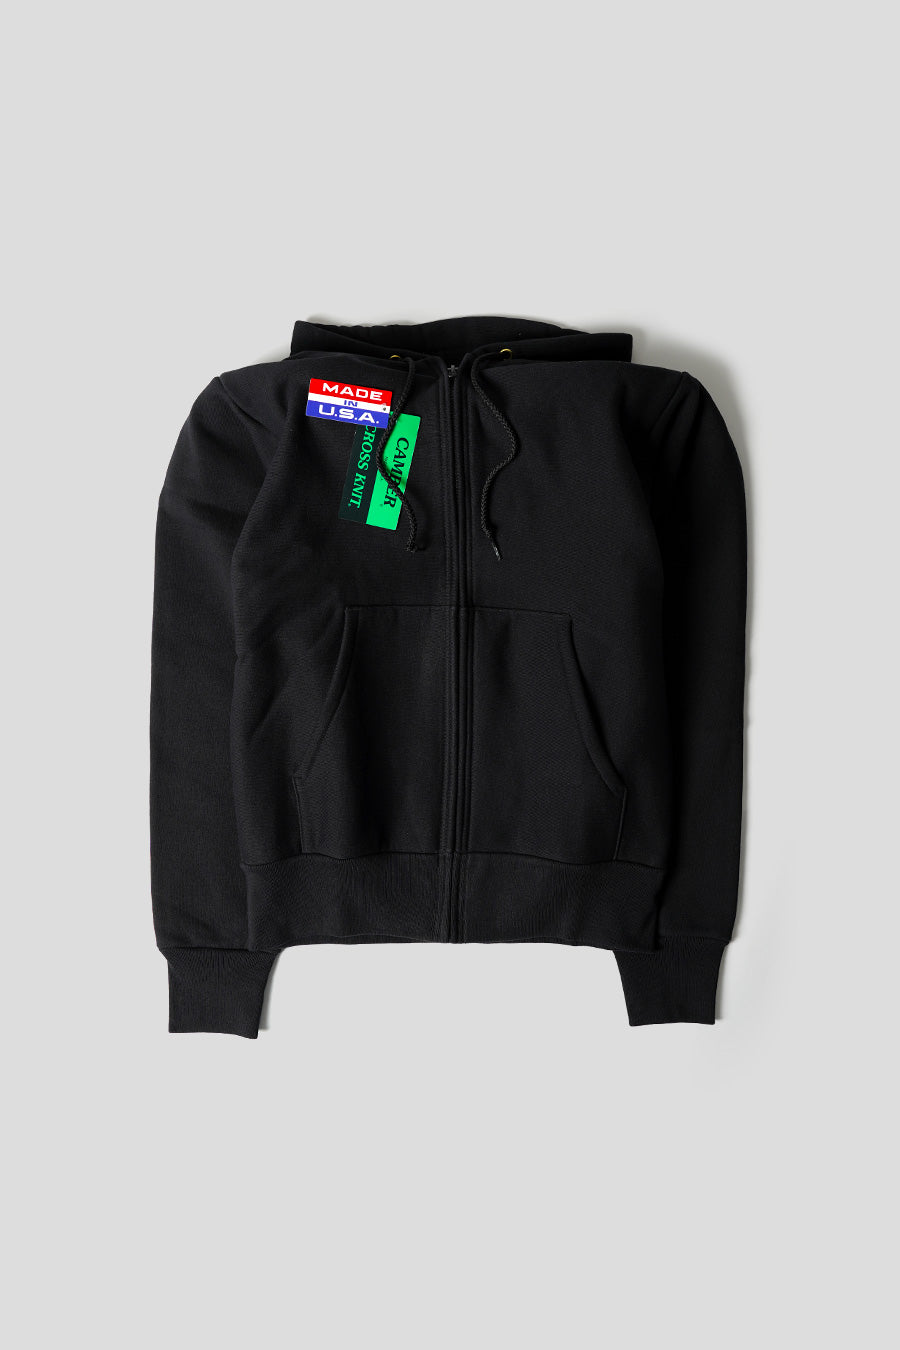 CAMBER USA - HOODIE ZIP CROSS KNIT BLACK - LE LABO STORE